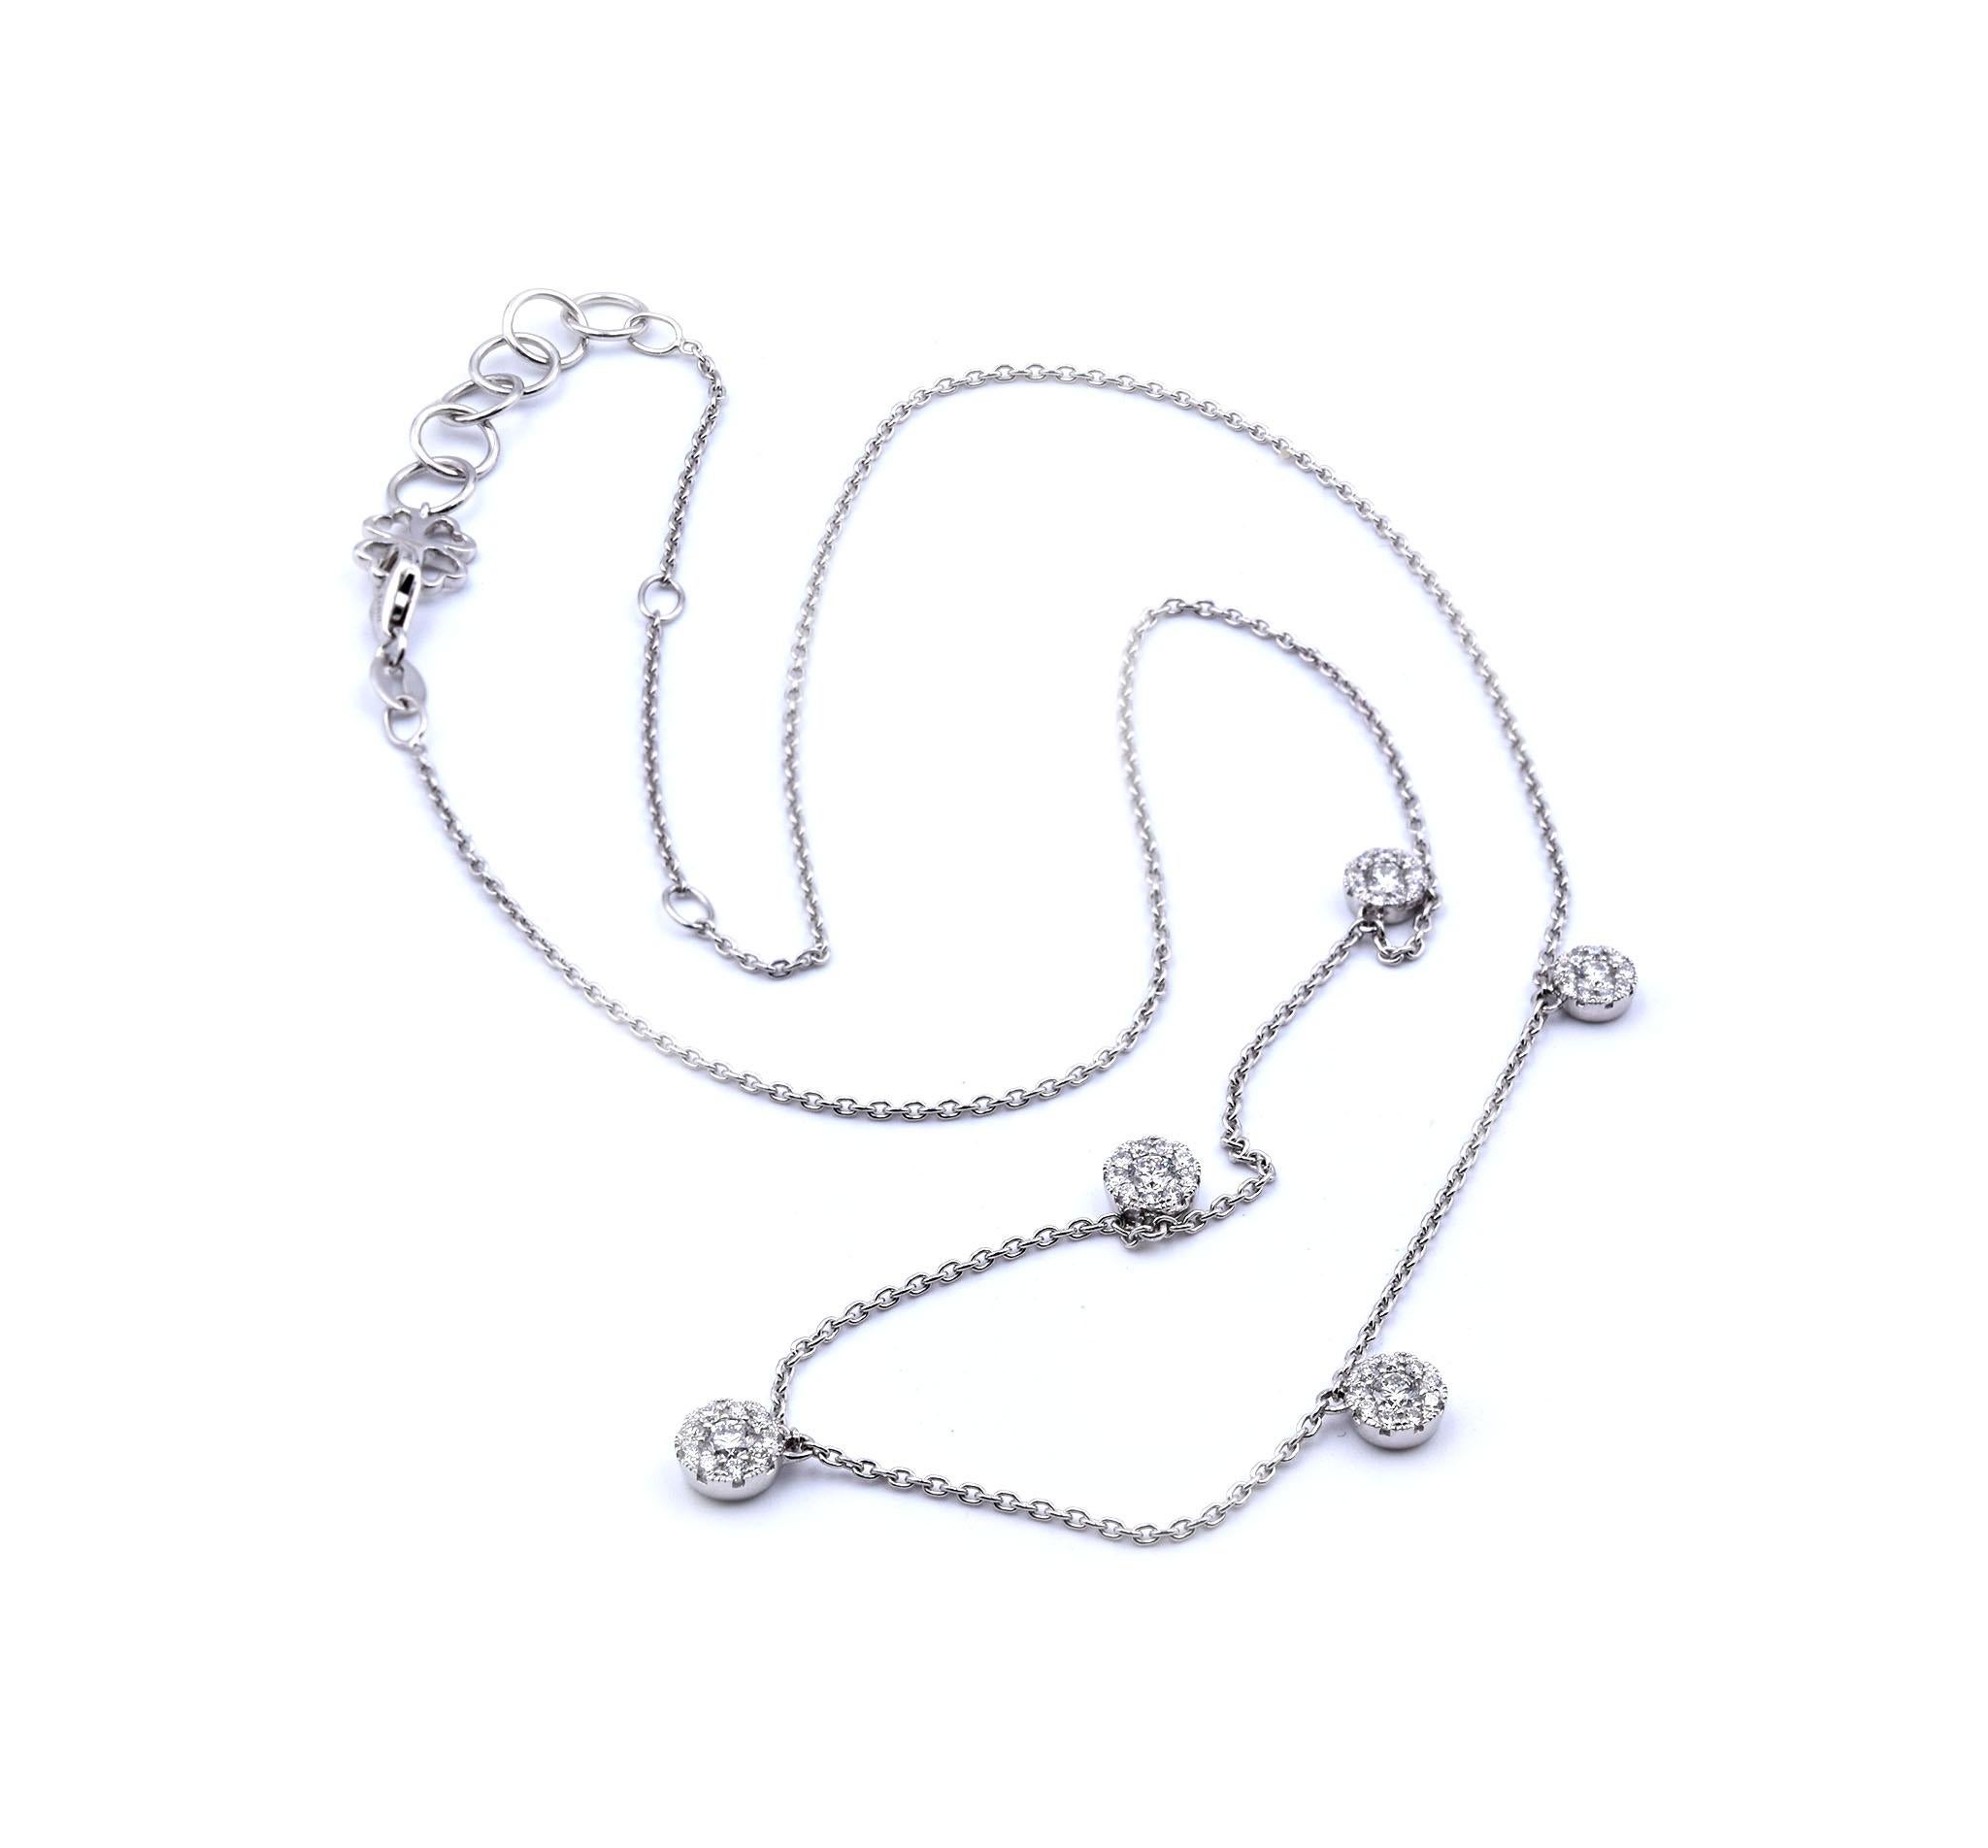 Designer: Custom
Material: 14K white gold
Diamonds: 50 round brilliant cut = 0.63cttw
Color: G
Clarity: VS2
Dimensions: necklace measures 18-inches length
Weight: 4.31 grams